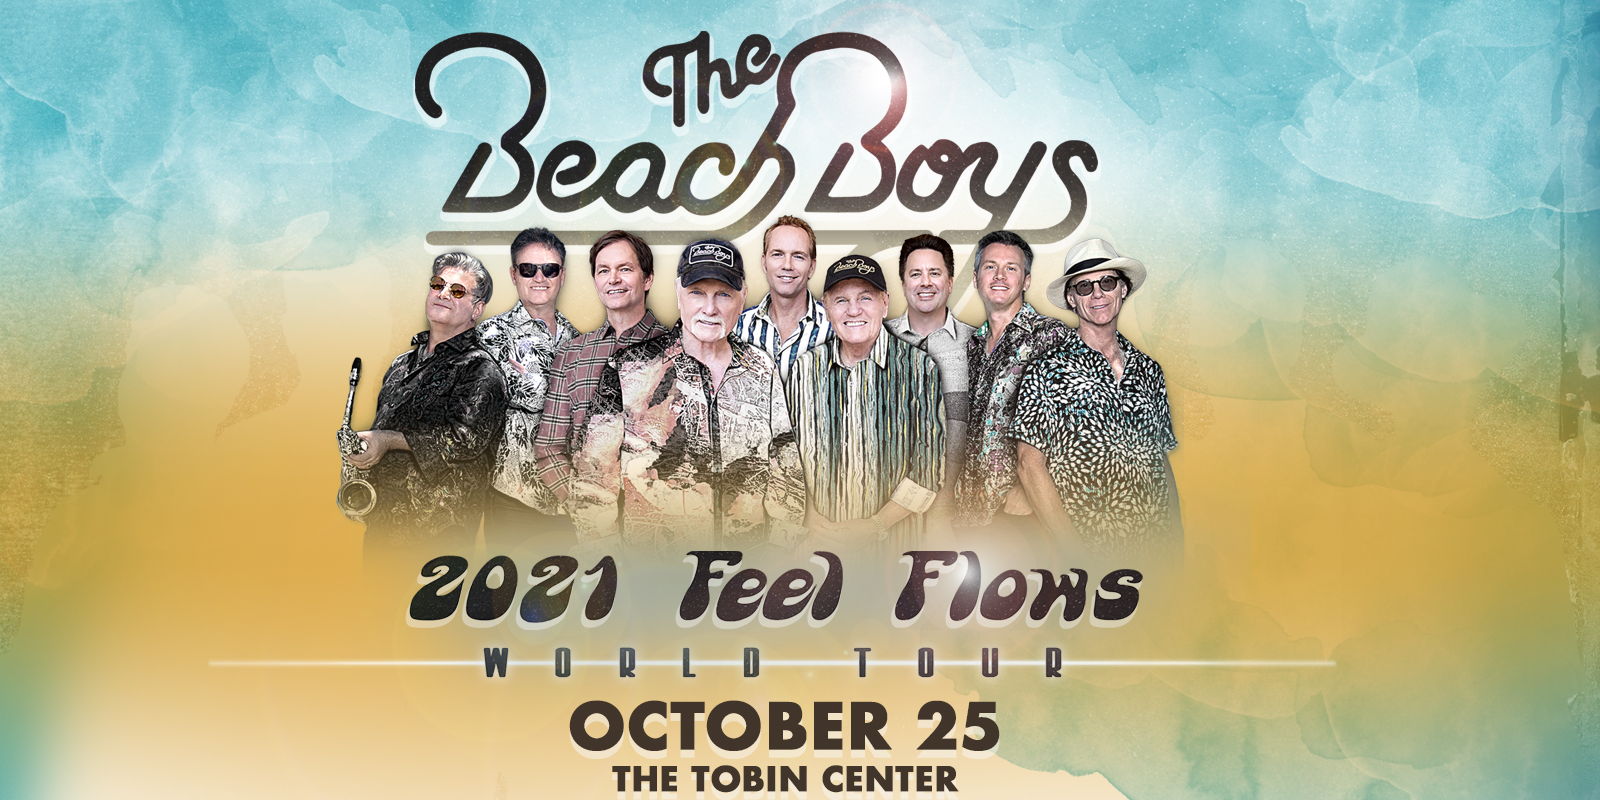 The Beach Boys promotional image